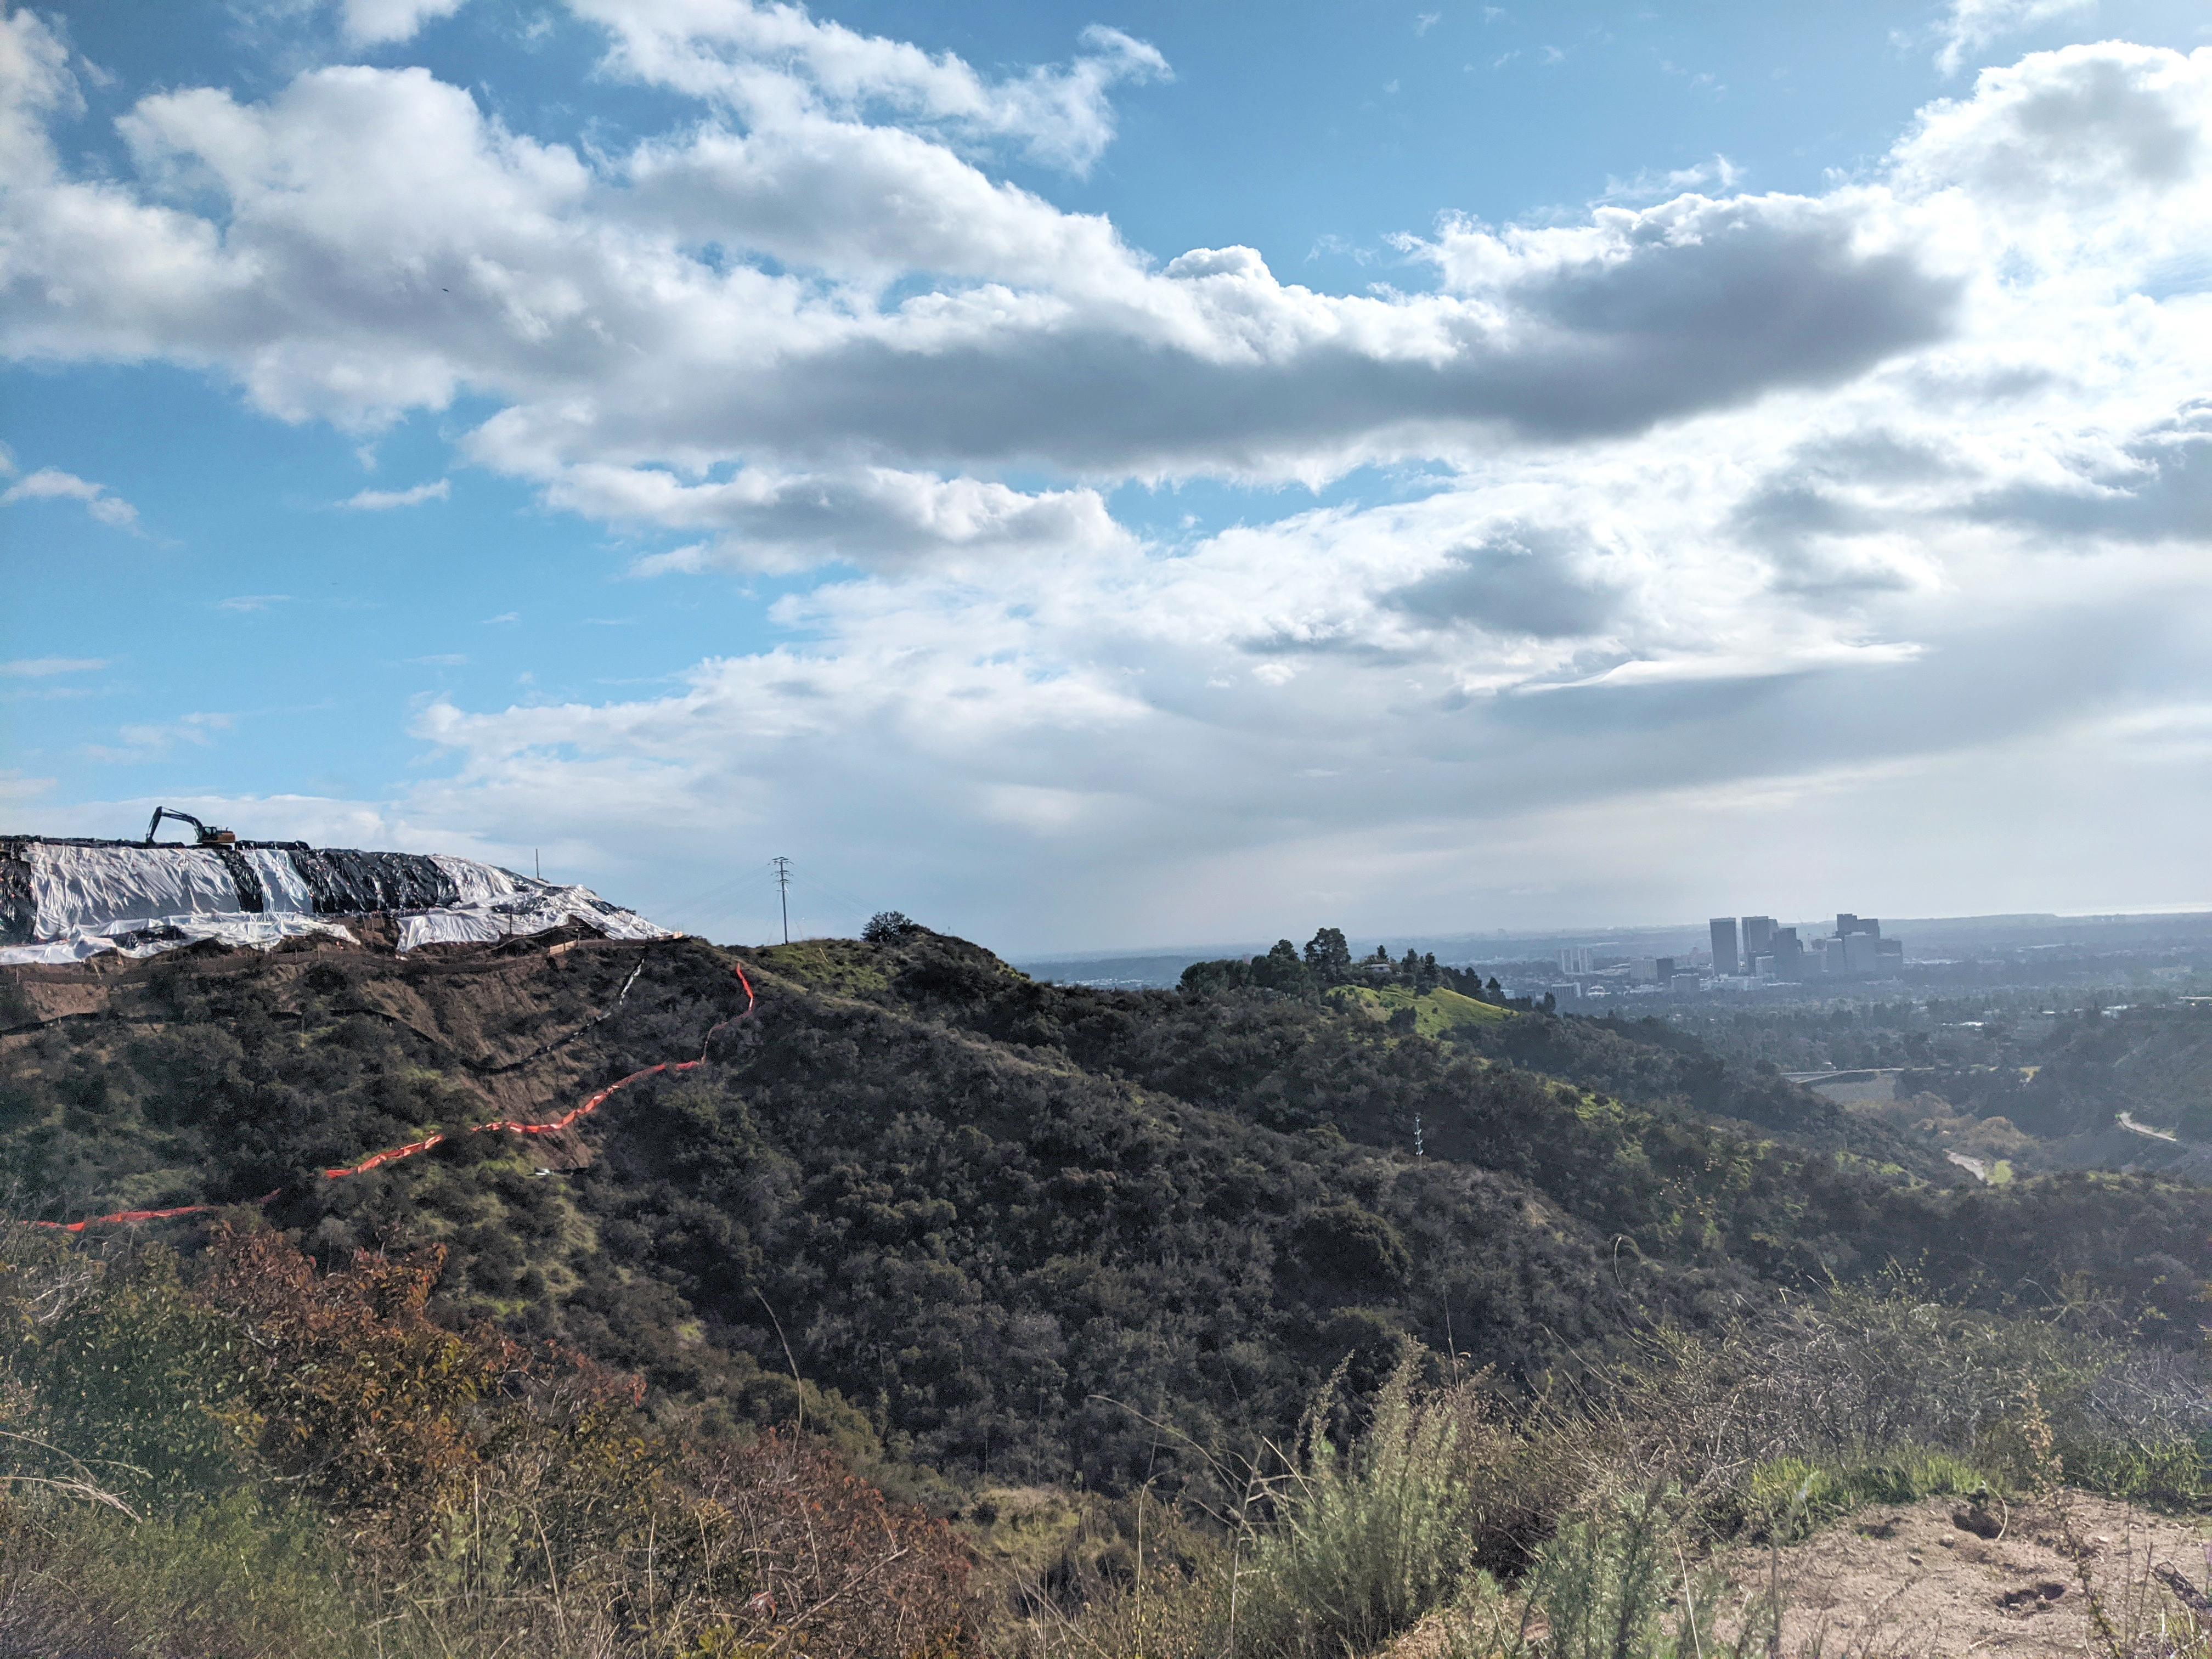 A hillside with a bunch of plastic on it and an earthmover atop it. In the backround, there is a view of the city, partly obscured by smog, and the outlines of a cluster of tall buildings.